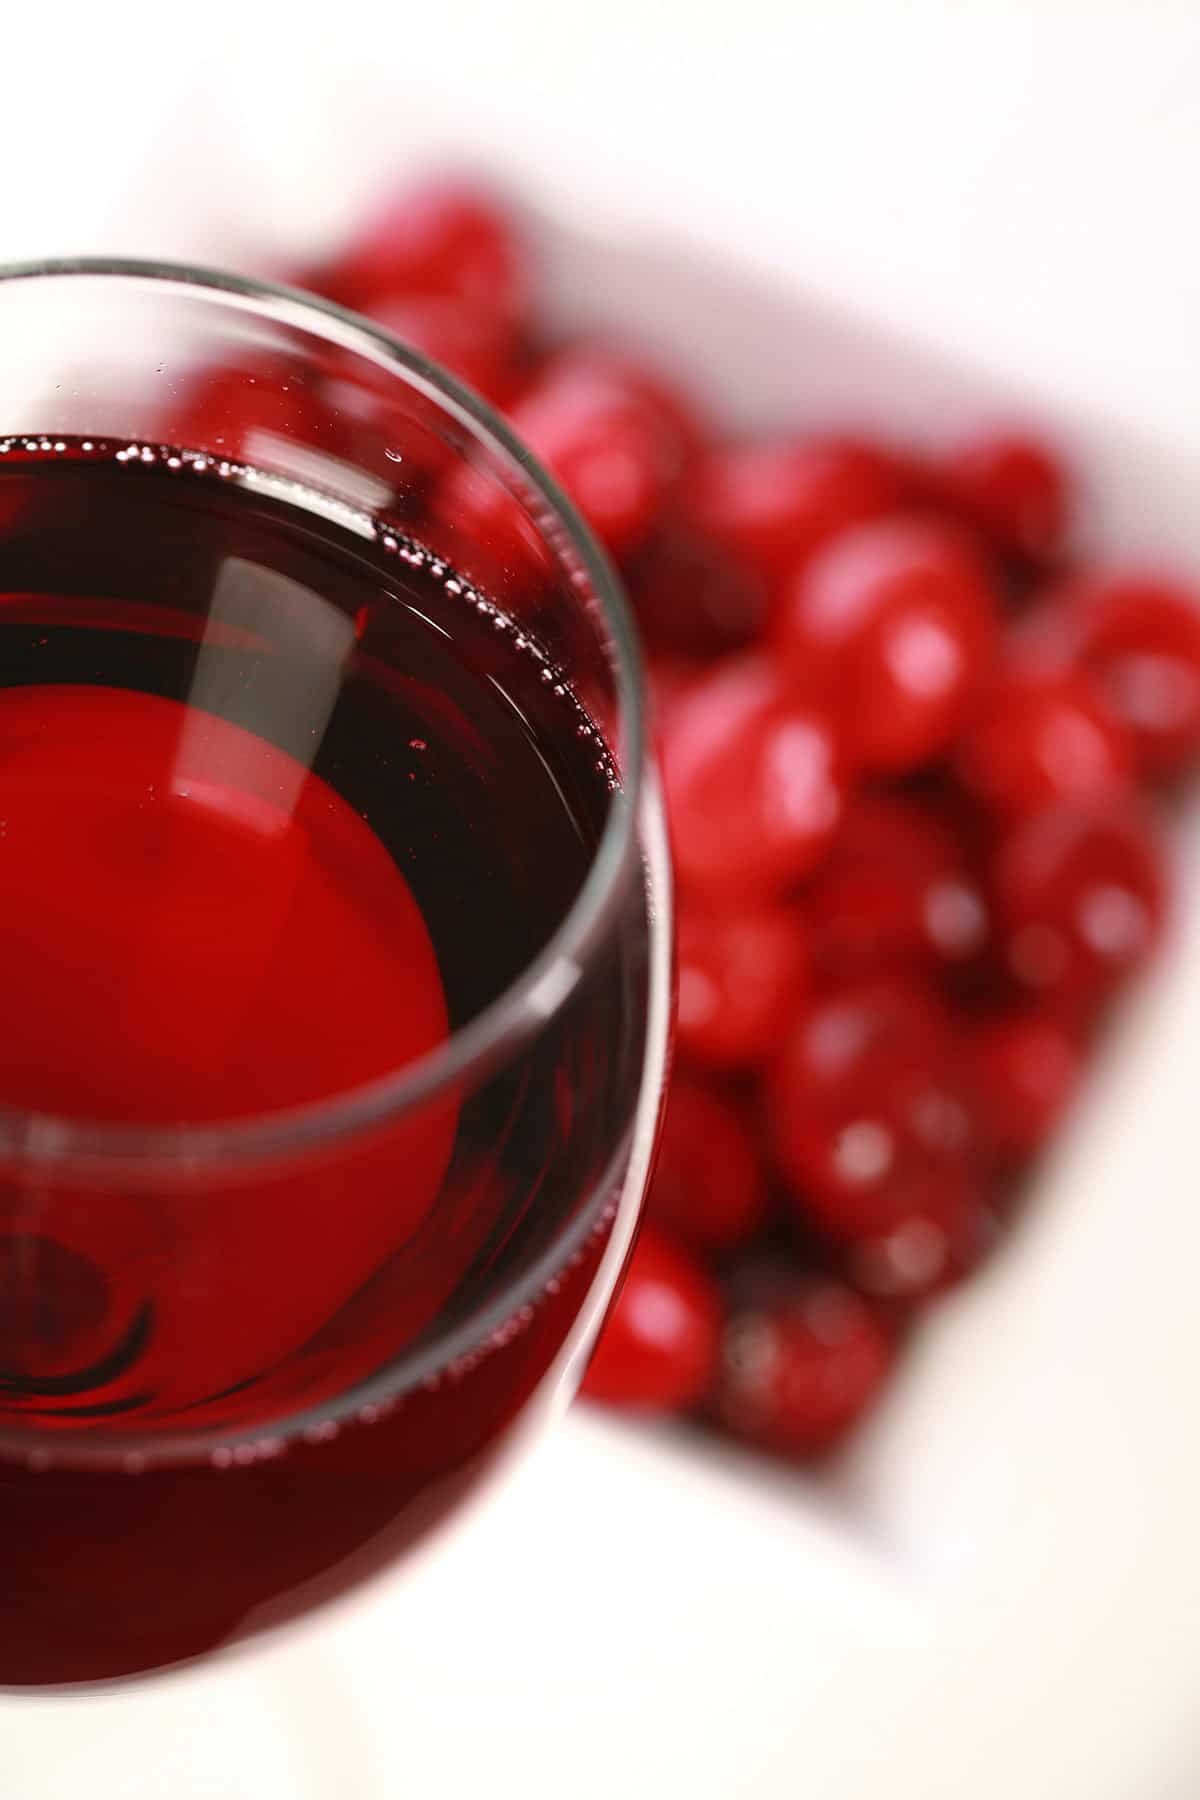 A glass of red wine -made with this cranberry wine recipe - is pictured next to a small bowl of fresh cranberries, against a white background.